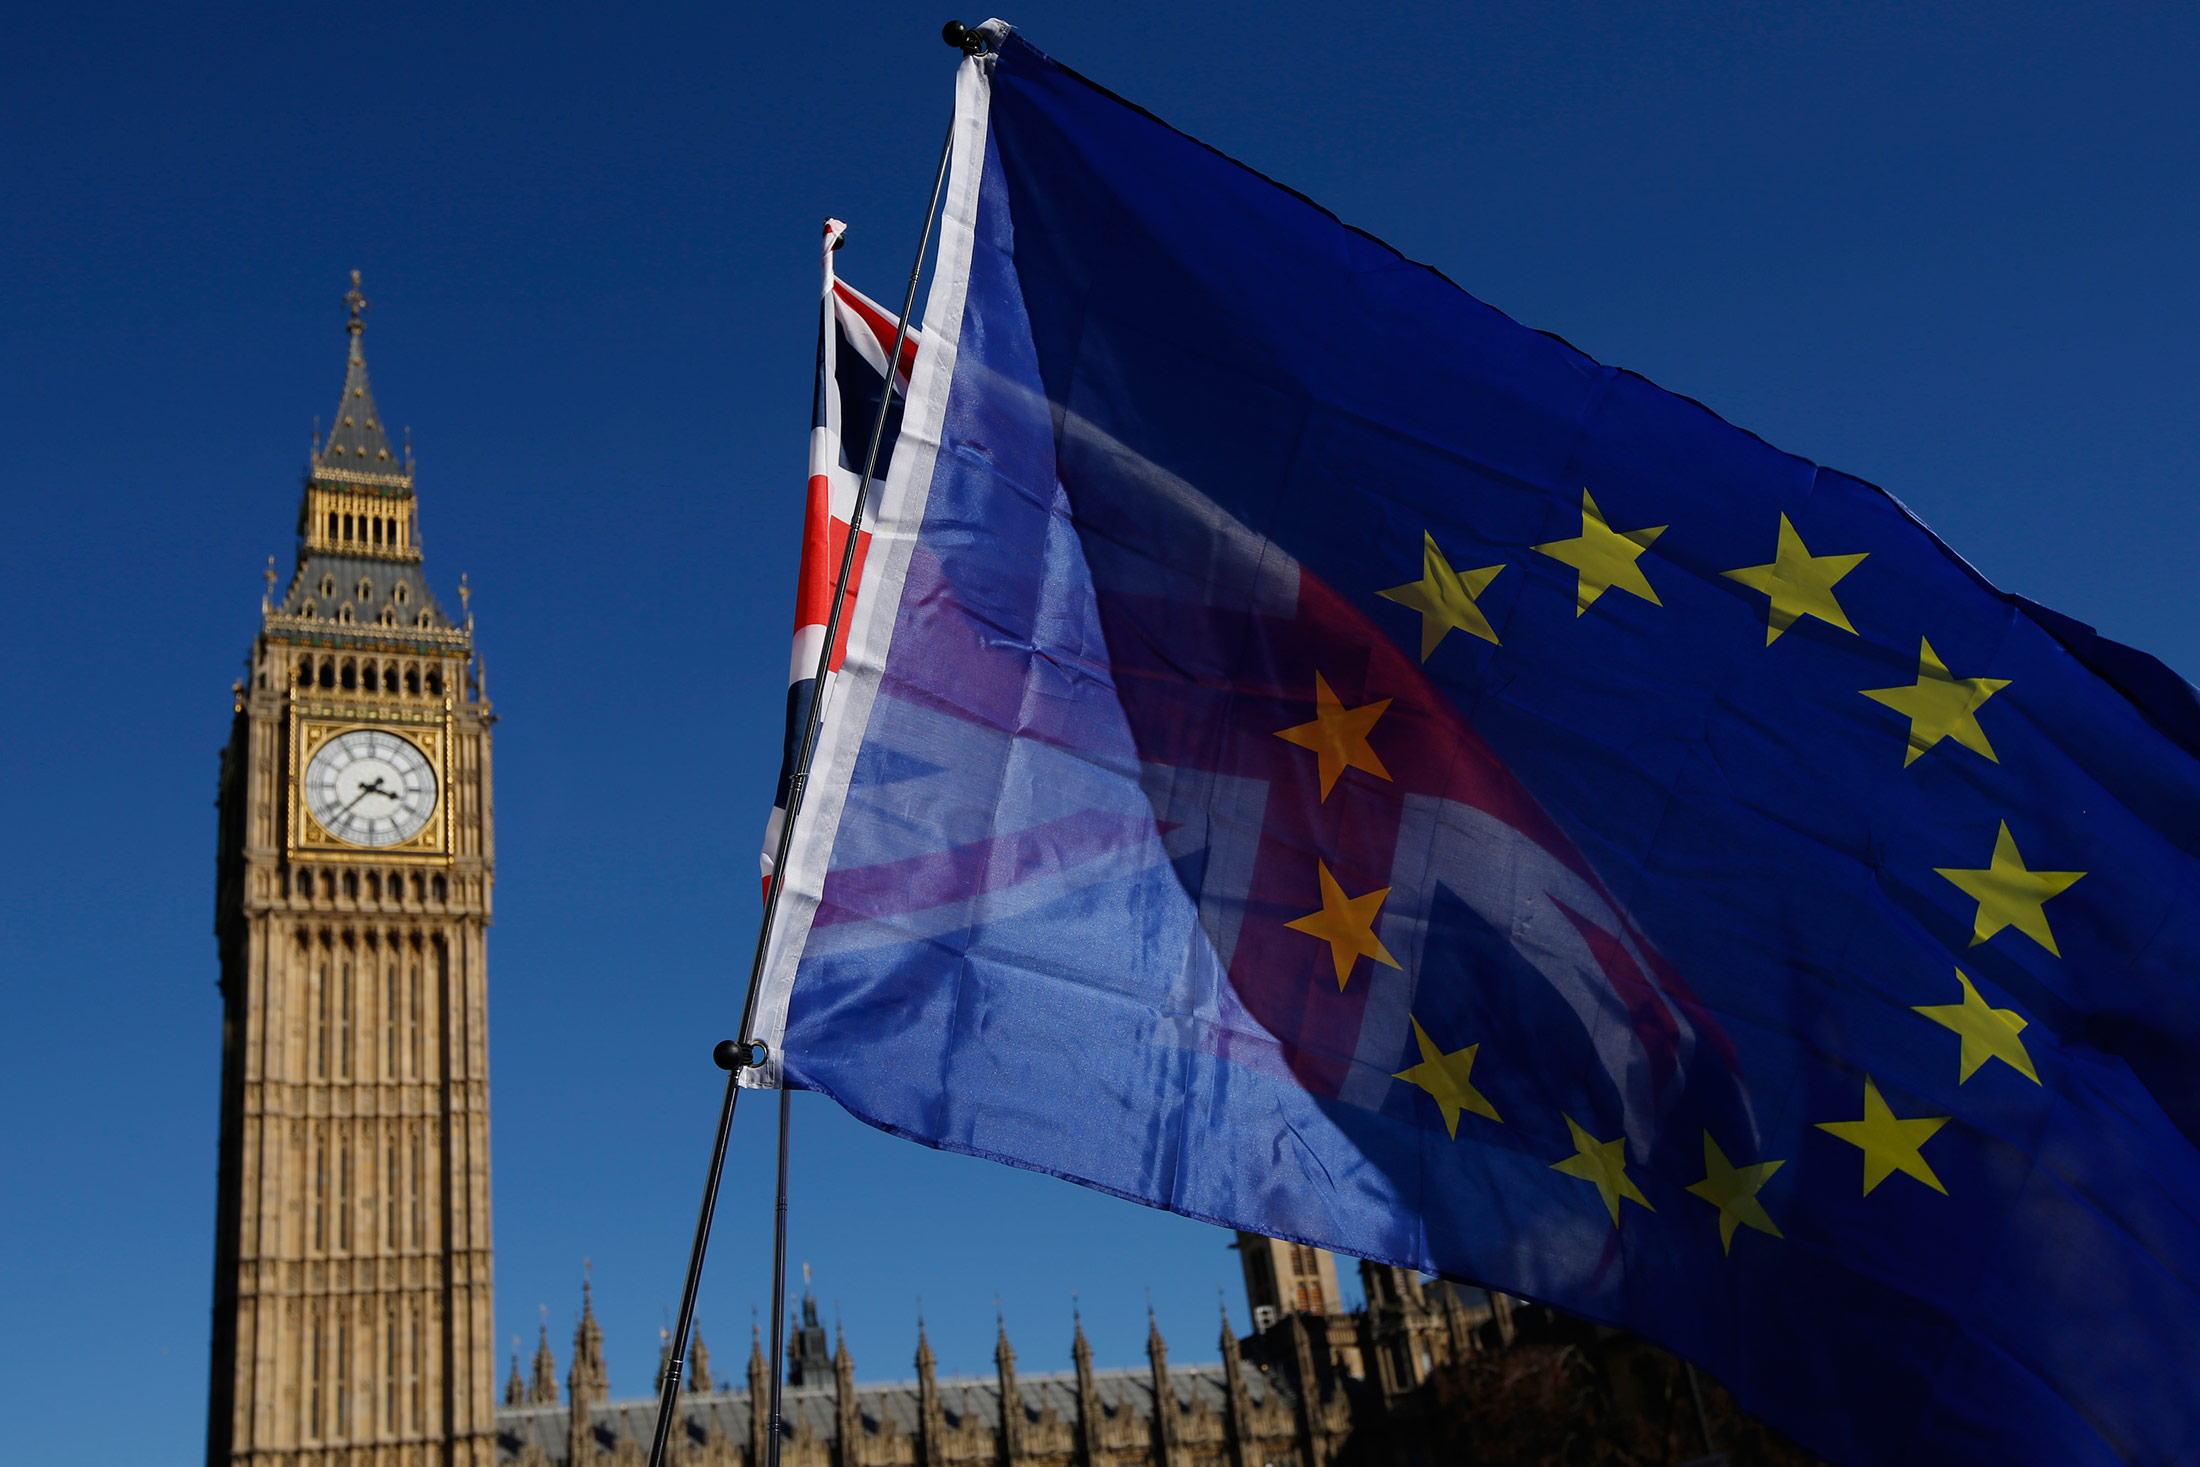 A European Union (EU) flag, front, and a Union flag, also known as Union Jack, fly in front of Elizabeth Tower, commonly referred to as Big Ben, during a Unite for Europe march to protest Brexit in central London, U.K., on Saturday, March 25, 2017. U.K. Prime Minister Theresa May is ready to officially start the process to leave the bloc on March 29.
